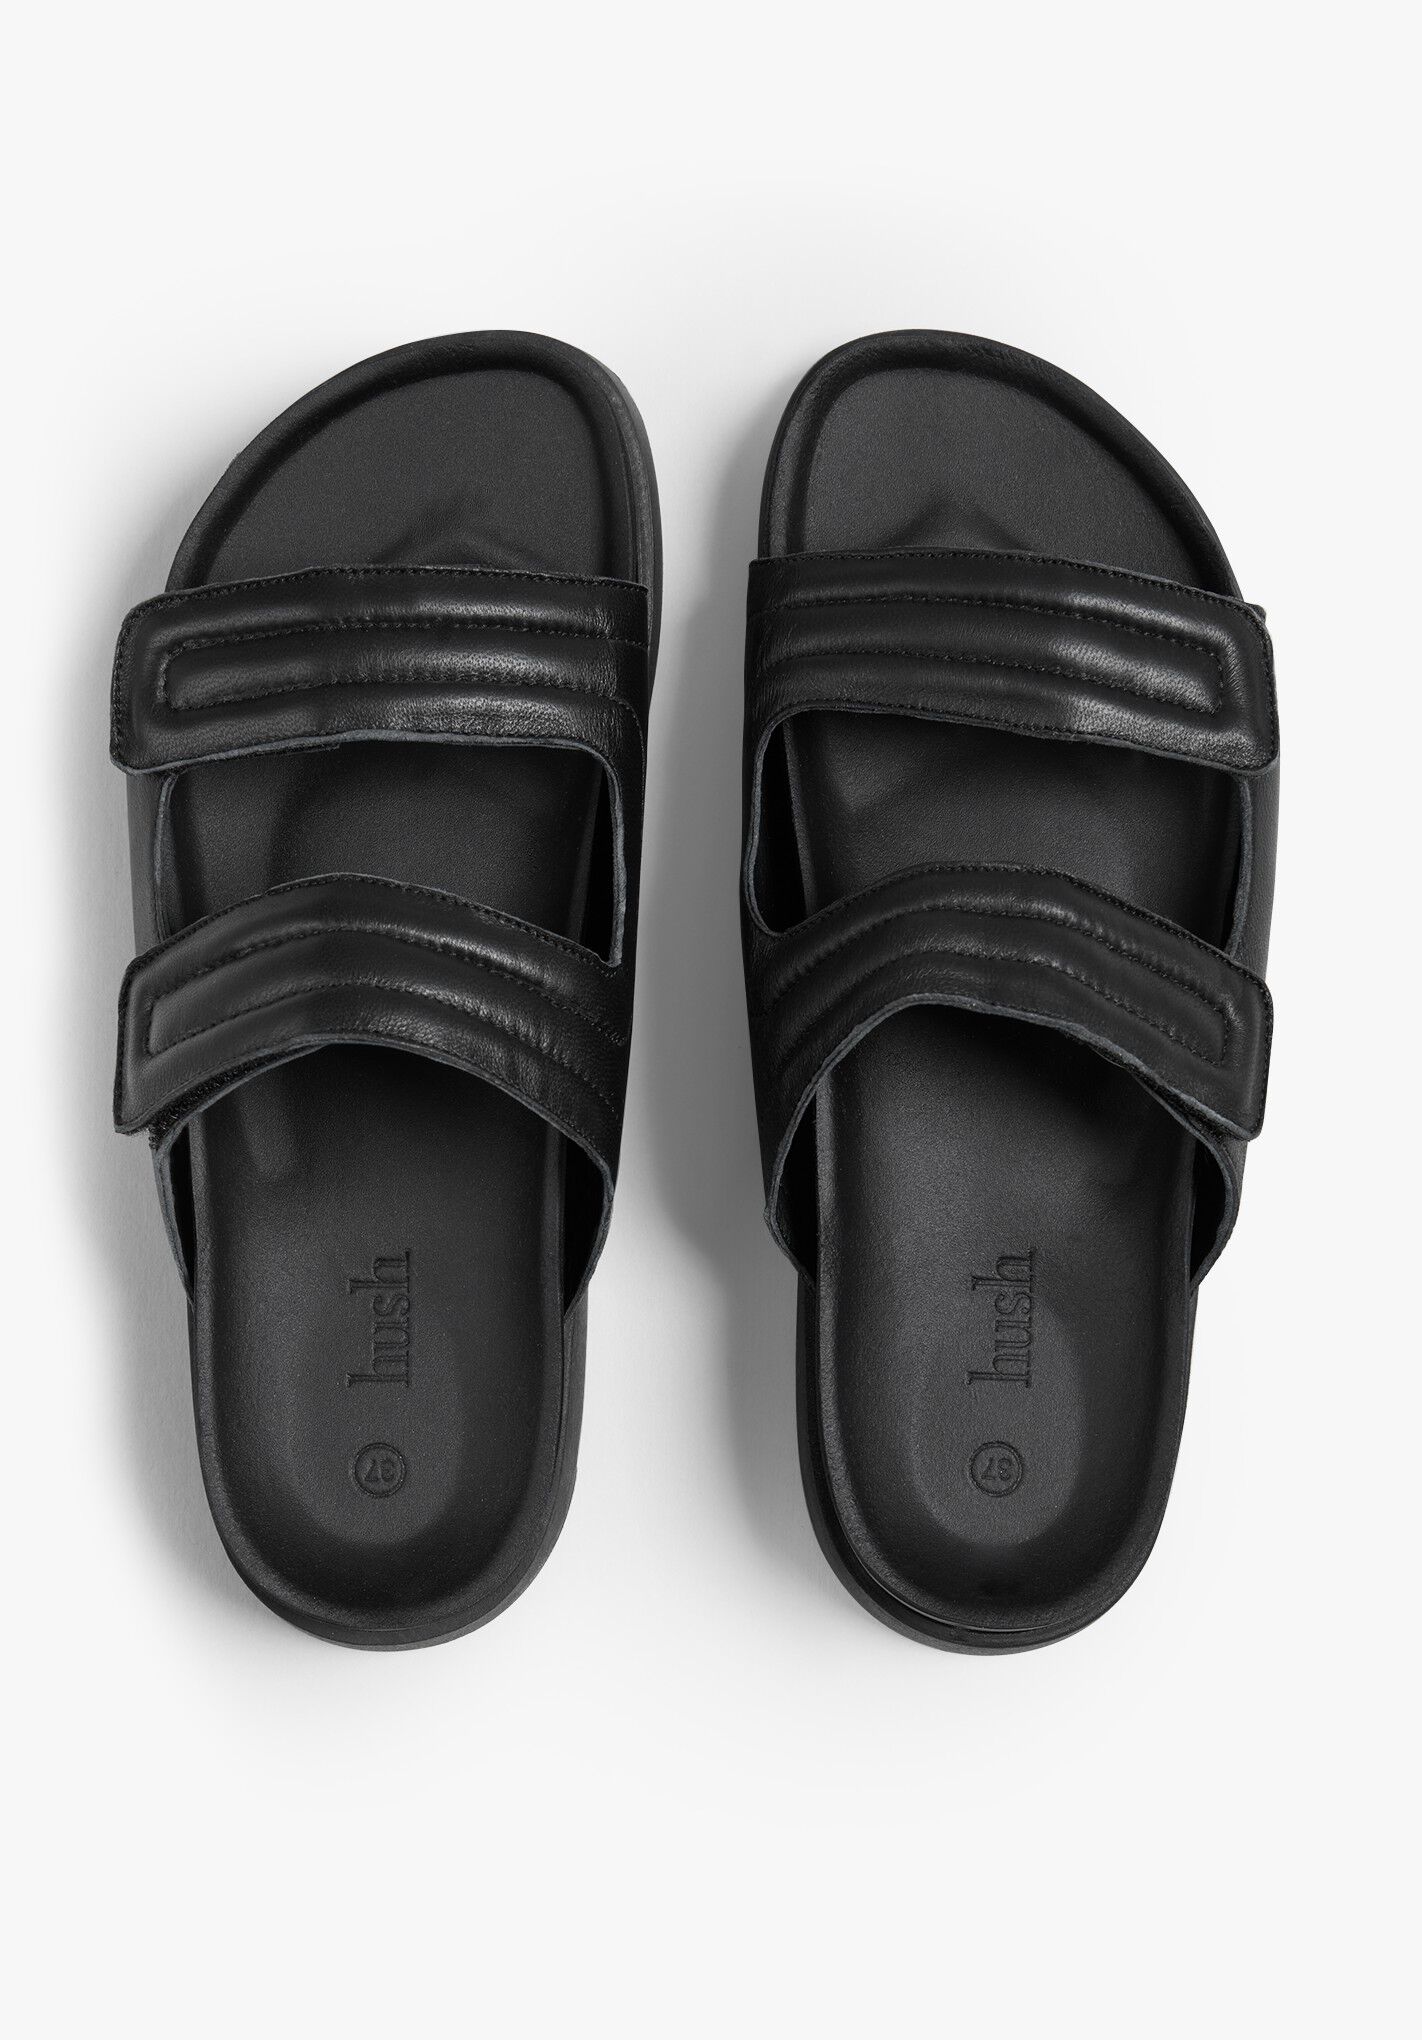 Hush Puppies Recycled Good Slippers, Black at John Lewis & Partners